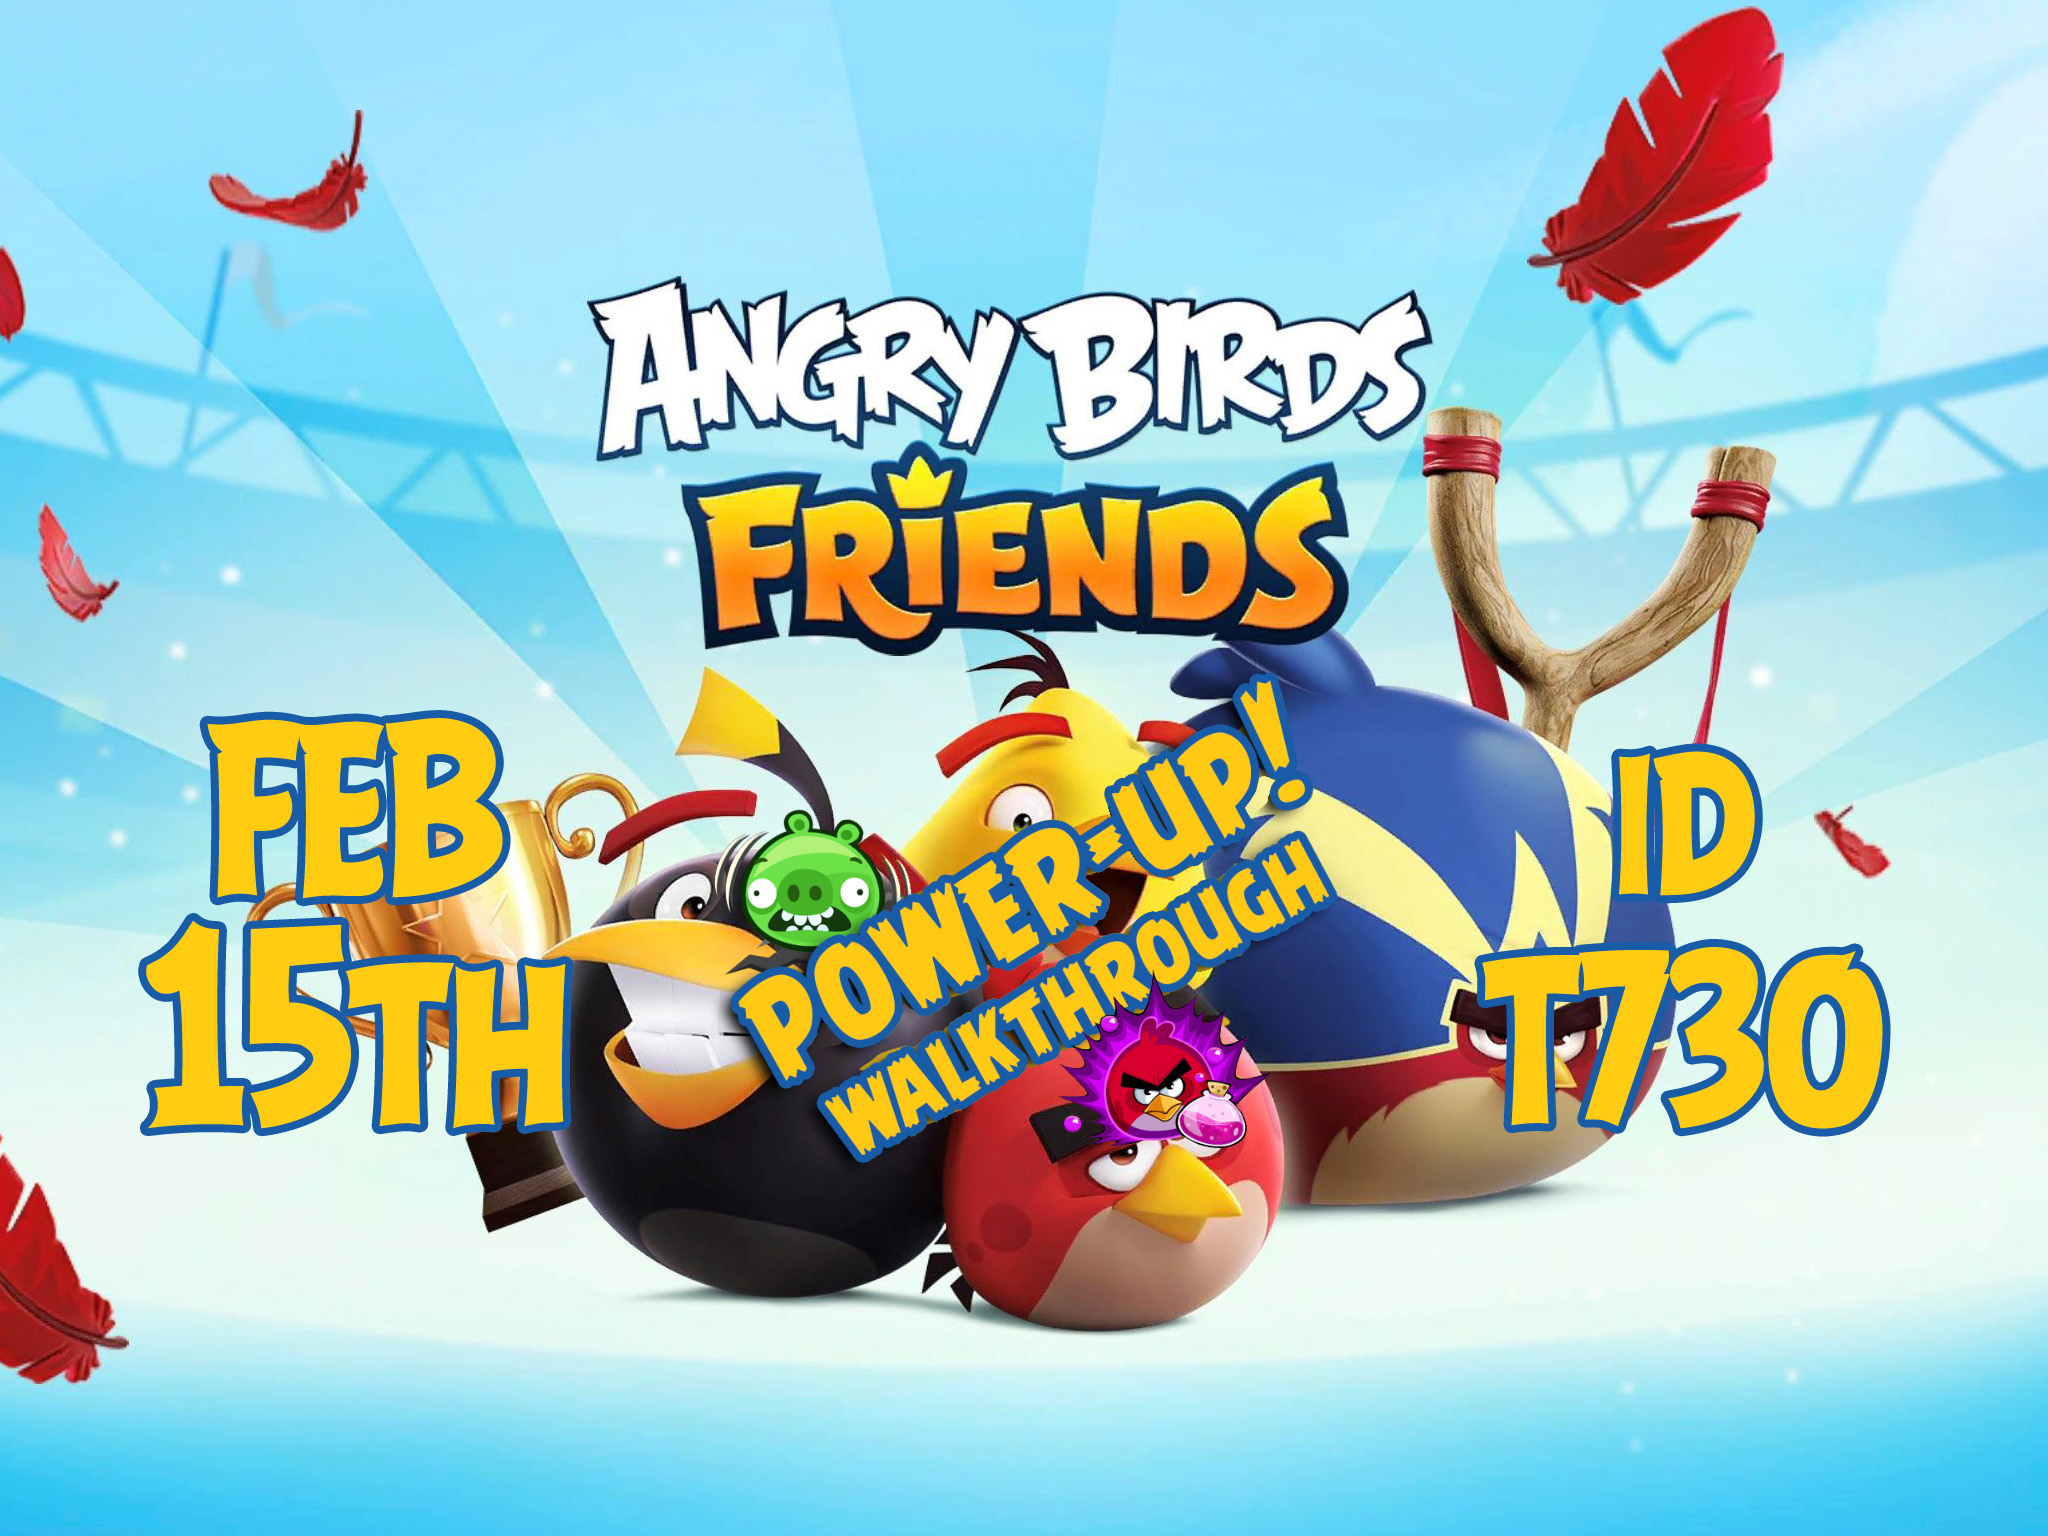 Angry-Birds-Friends-Tournament-T730-Feature-Image-PU